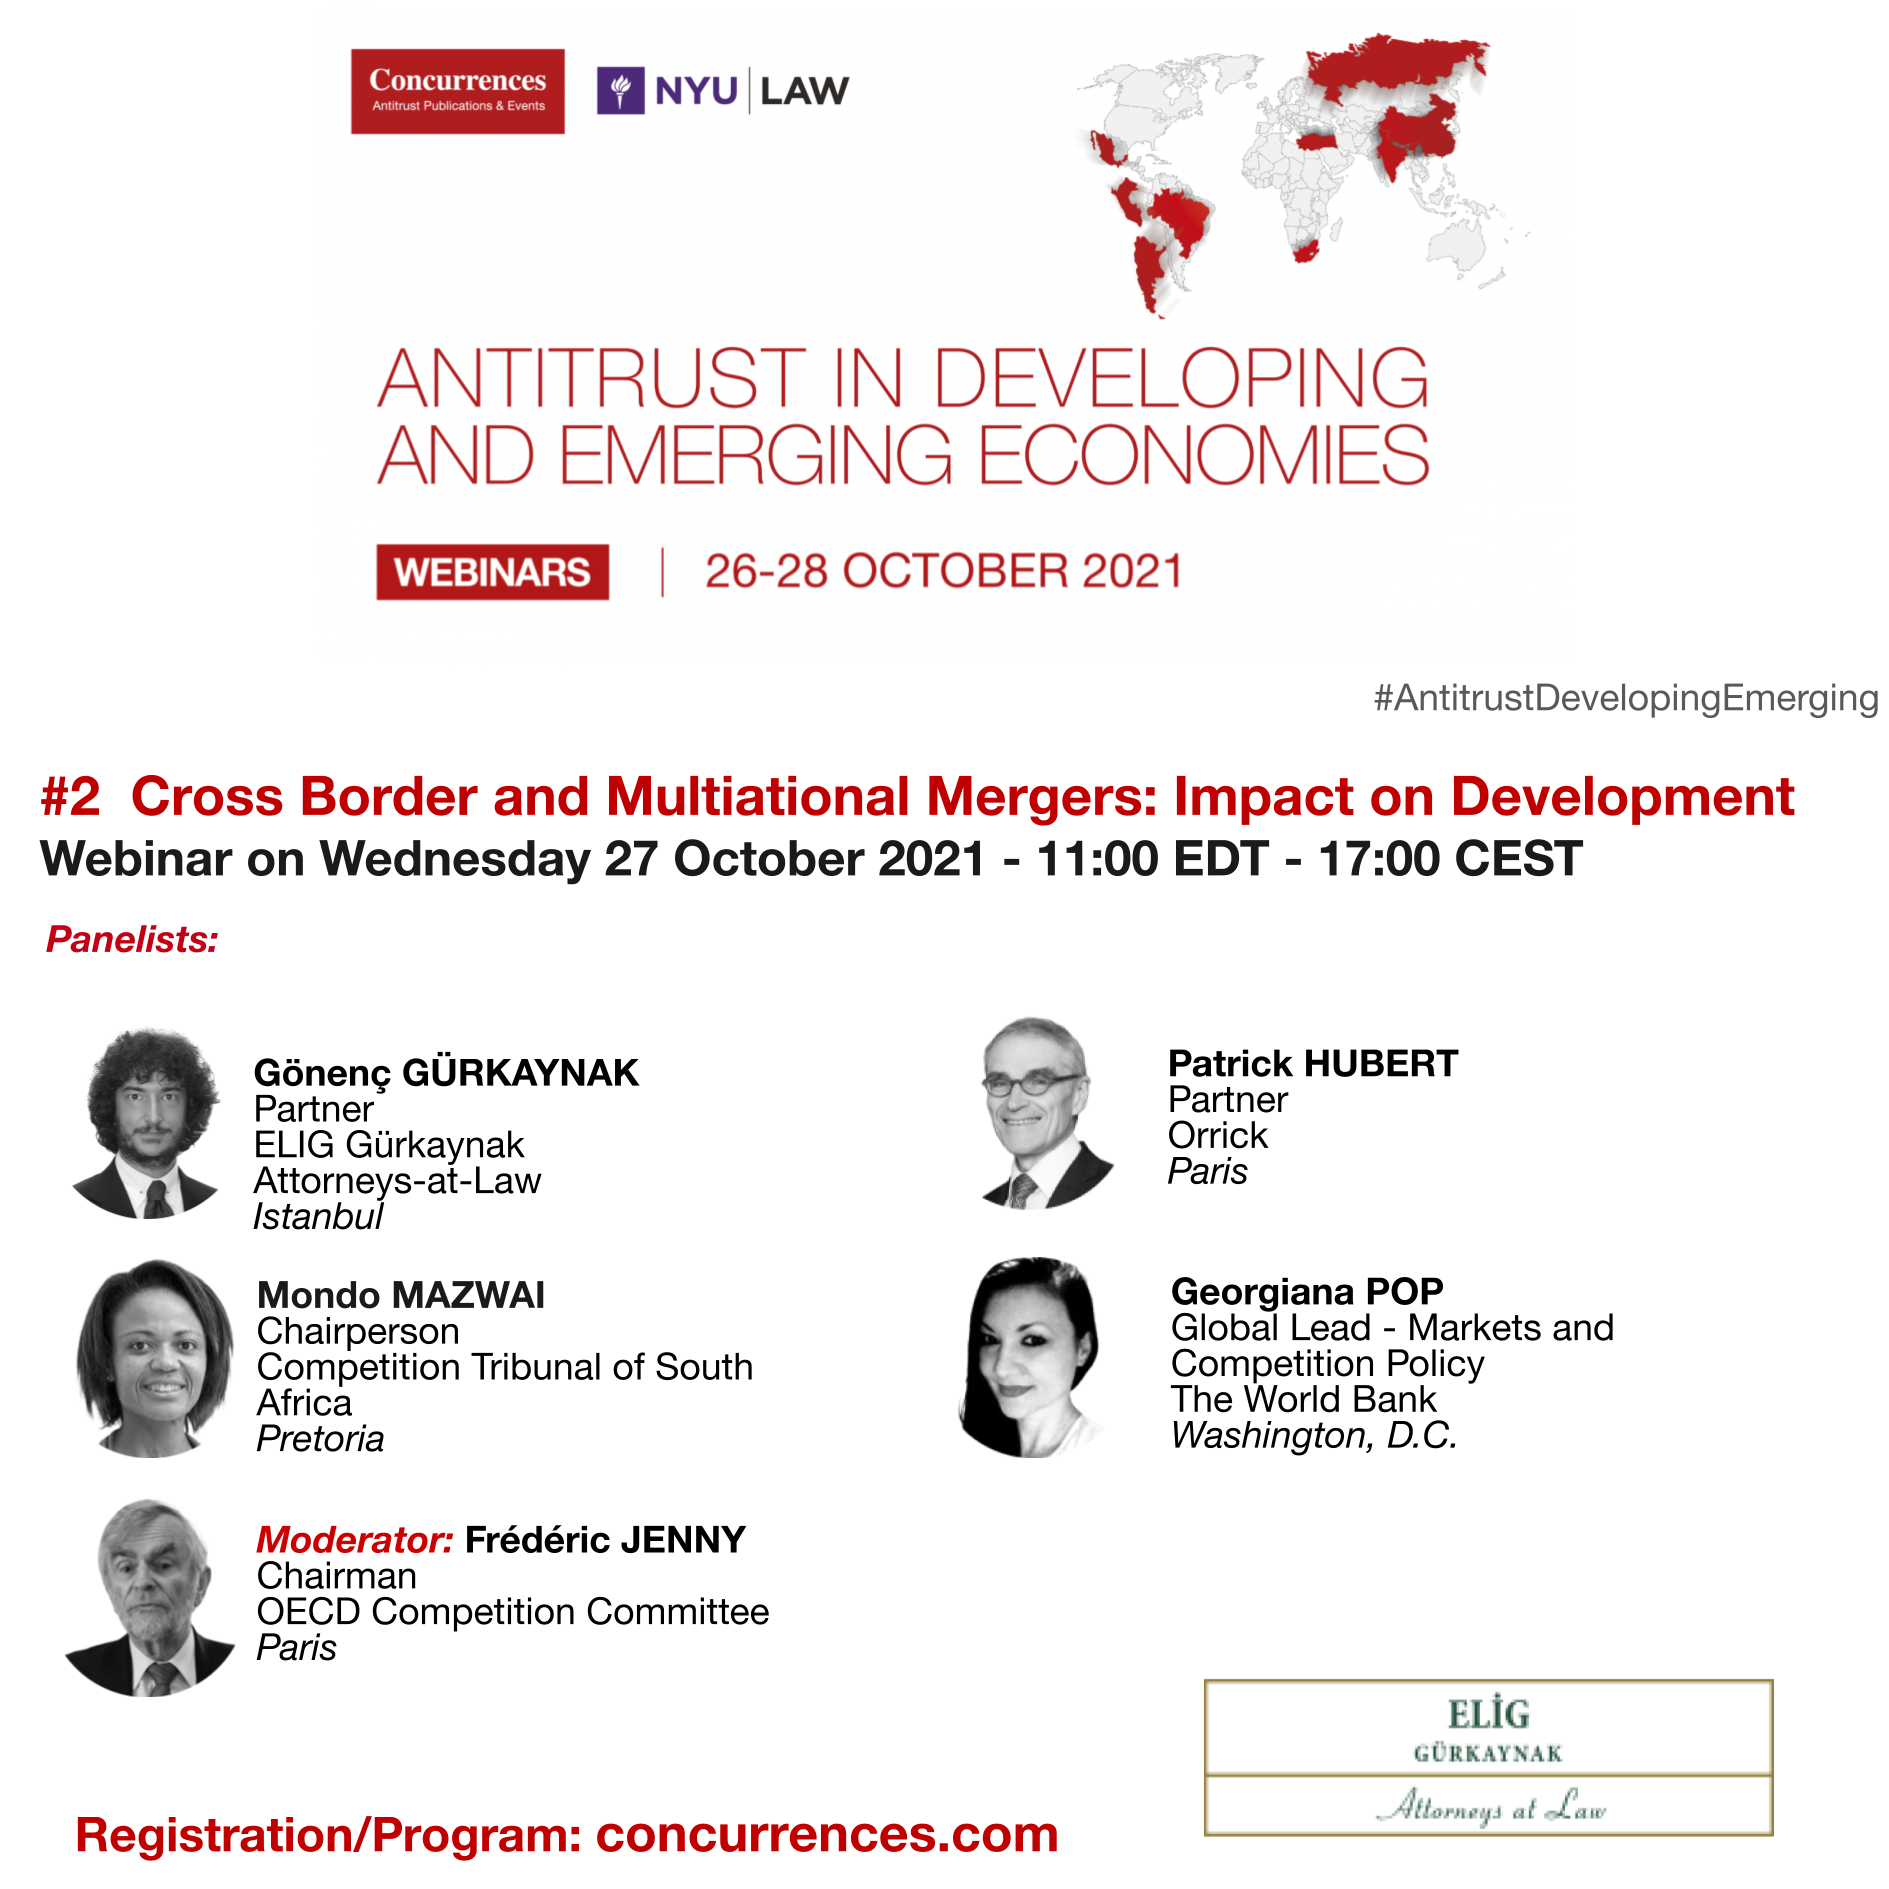 Mr. Gönenç Gürkaynak, our Founding Partner and head of competition law and regulatory team, will be speaking at a panel session entitled “Cross Border and Multinational Mergers: Impact on Development” at the upcoming Concurrences Antitrust in Developing and Emerging Economies Conference, to be held on Wednesday, October 27, 2021